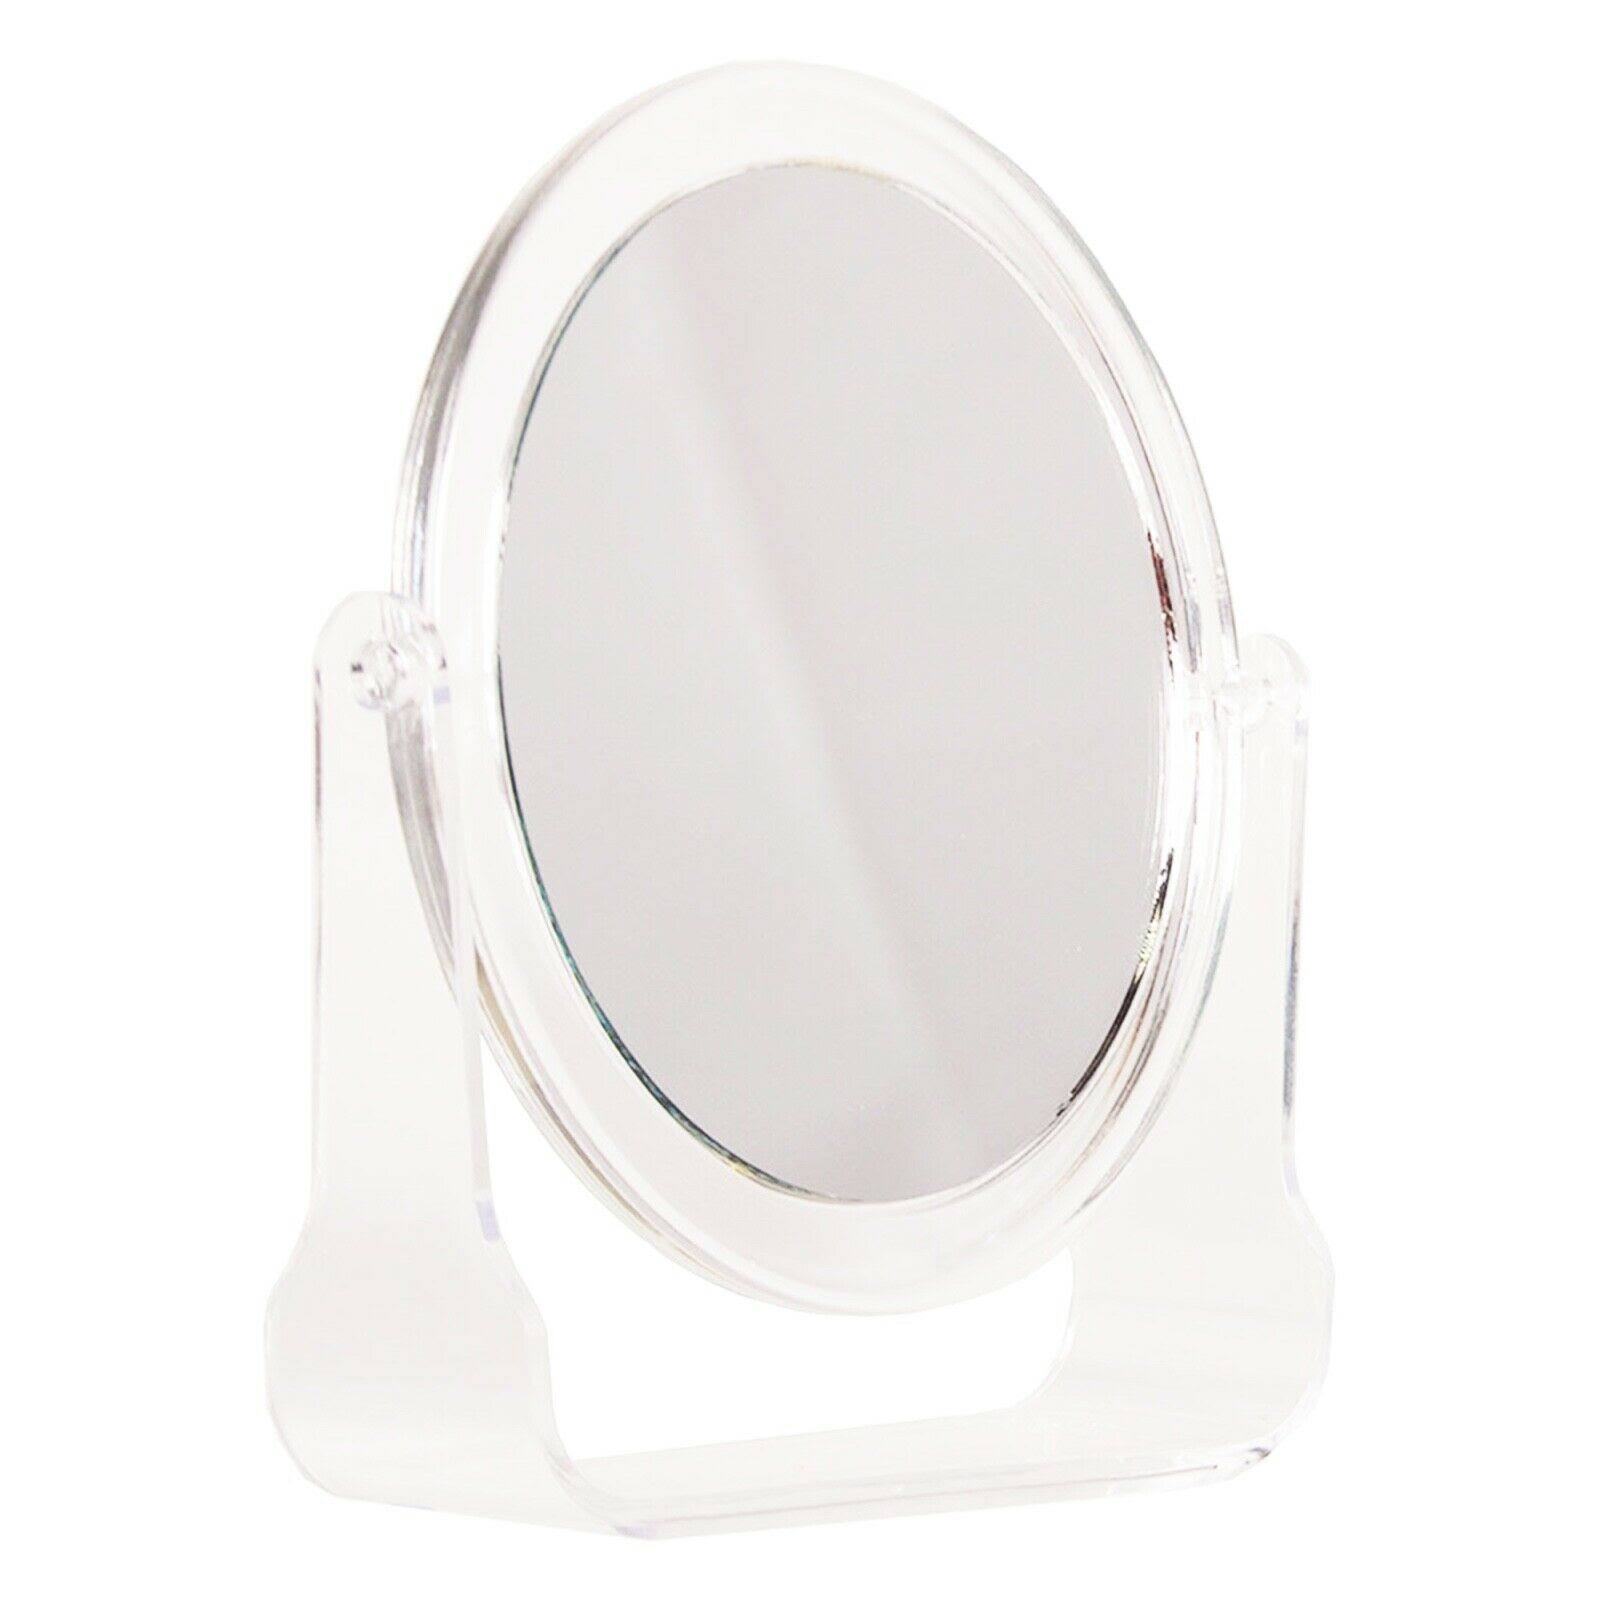 Double Sided Mirror Cosmetic Small Magnify Travel Make Up Shaving